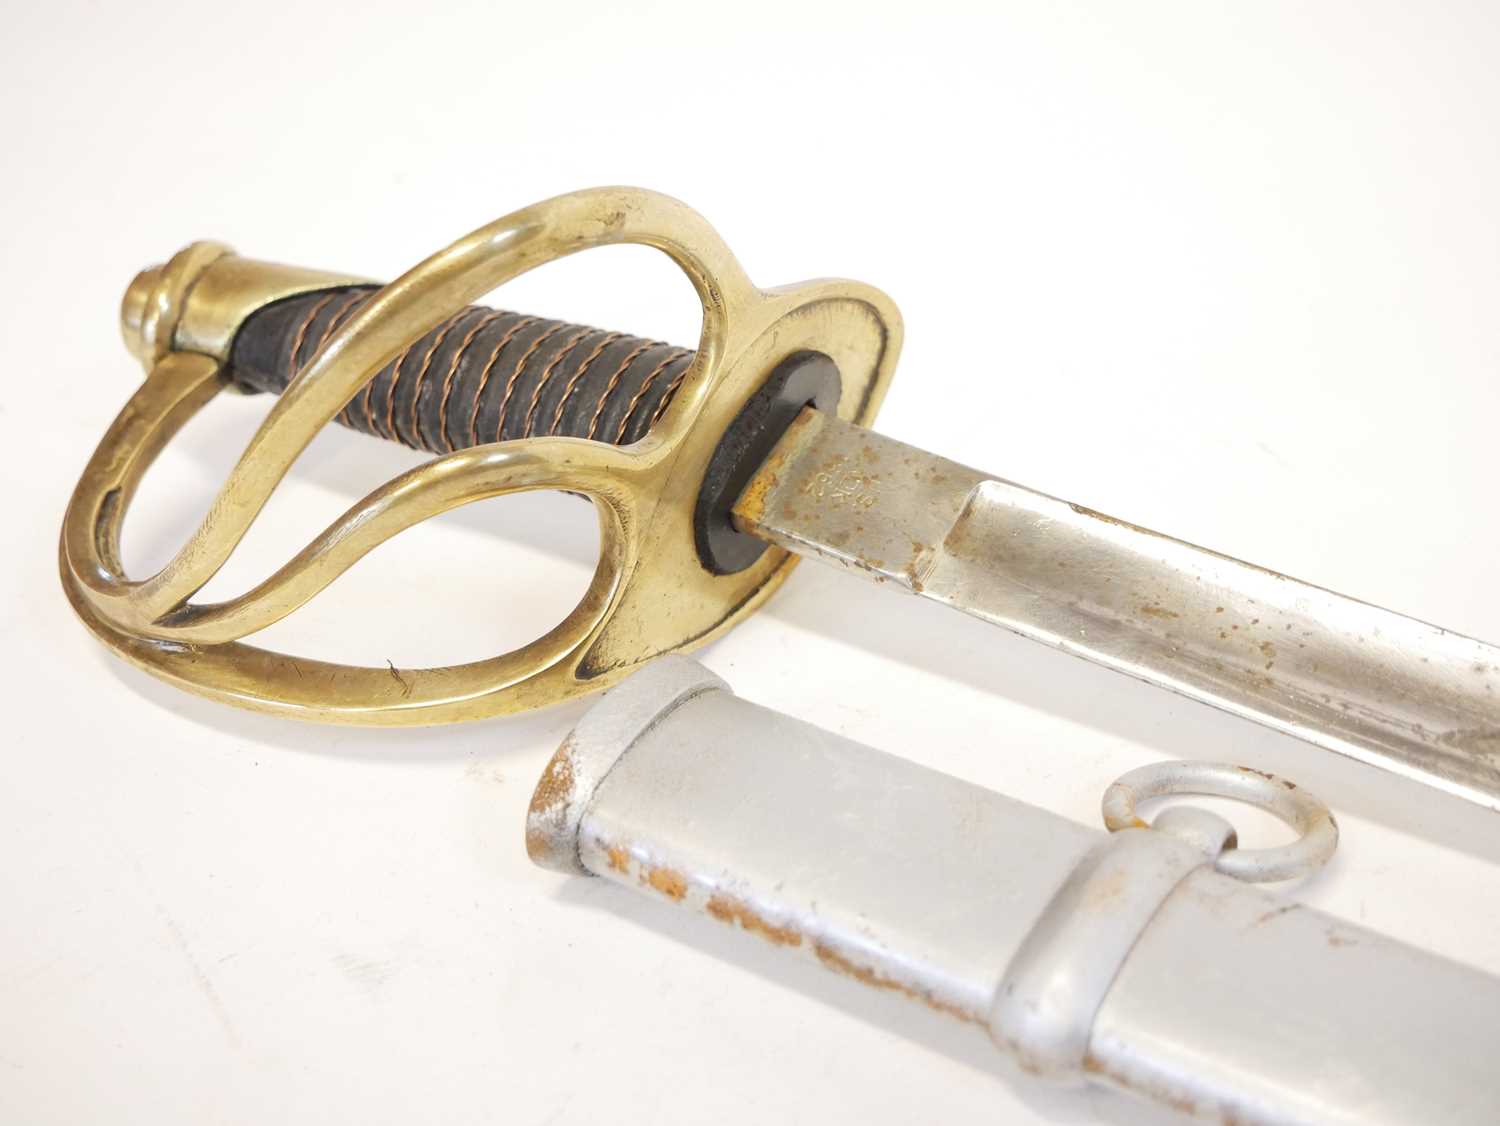 Reproduction US wrist breaker cavalry sabre and scabbard, curved fullered blade with brass guard and - Image 5 of 11